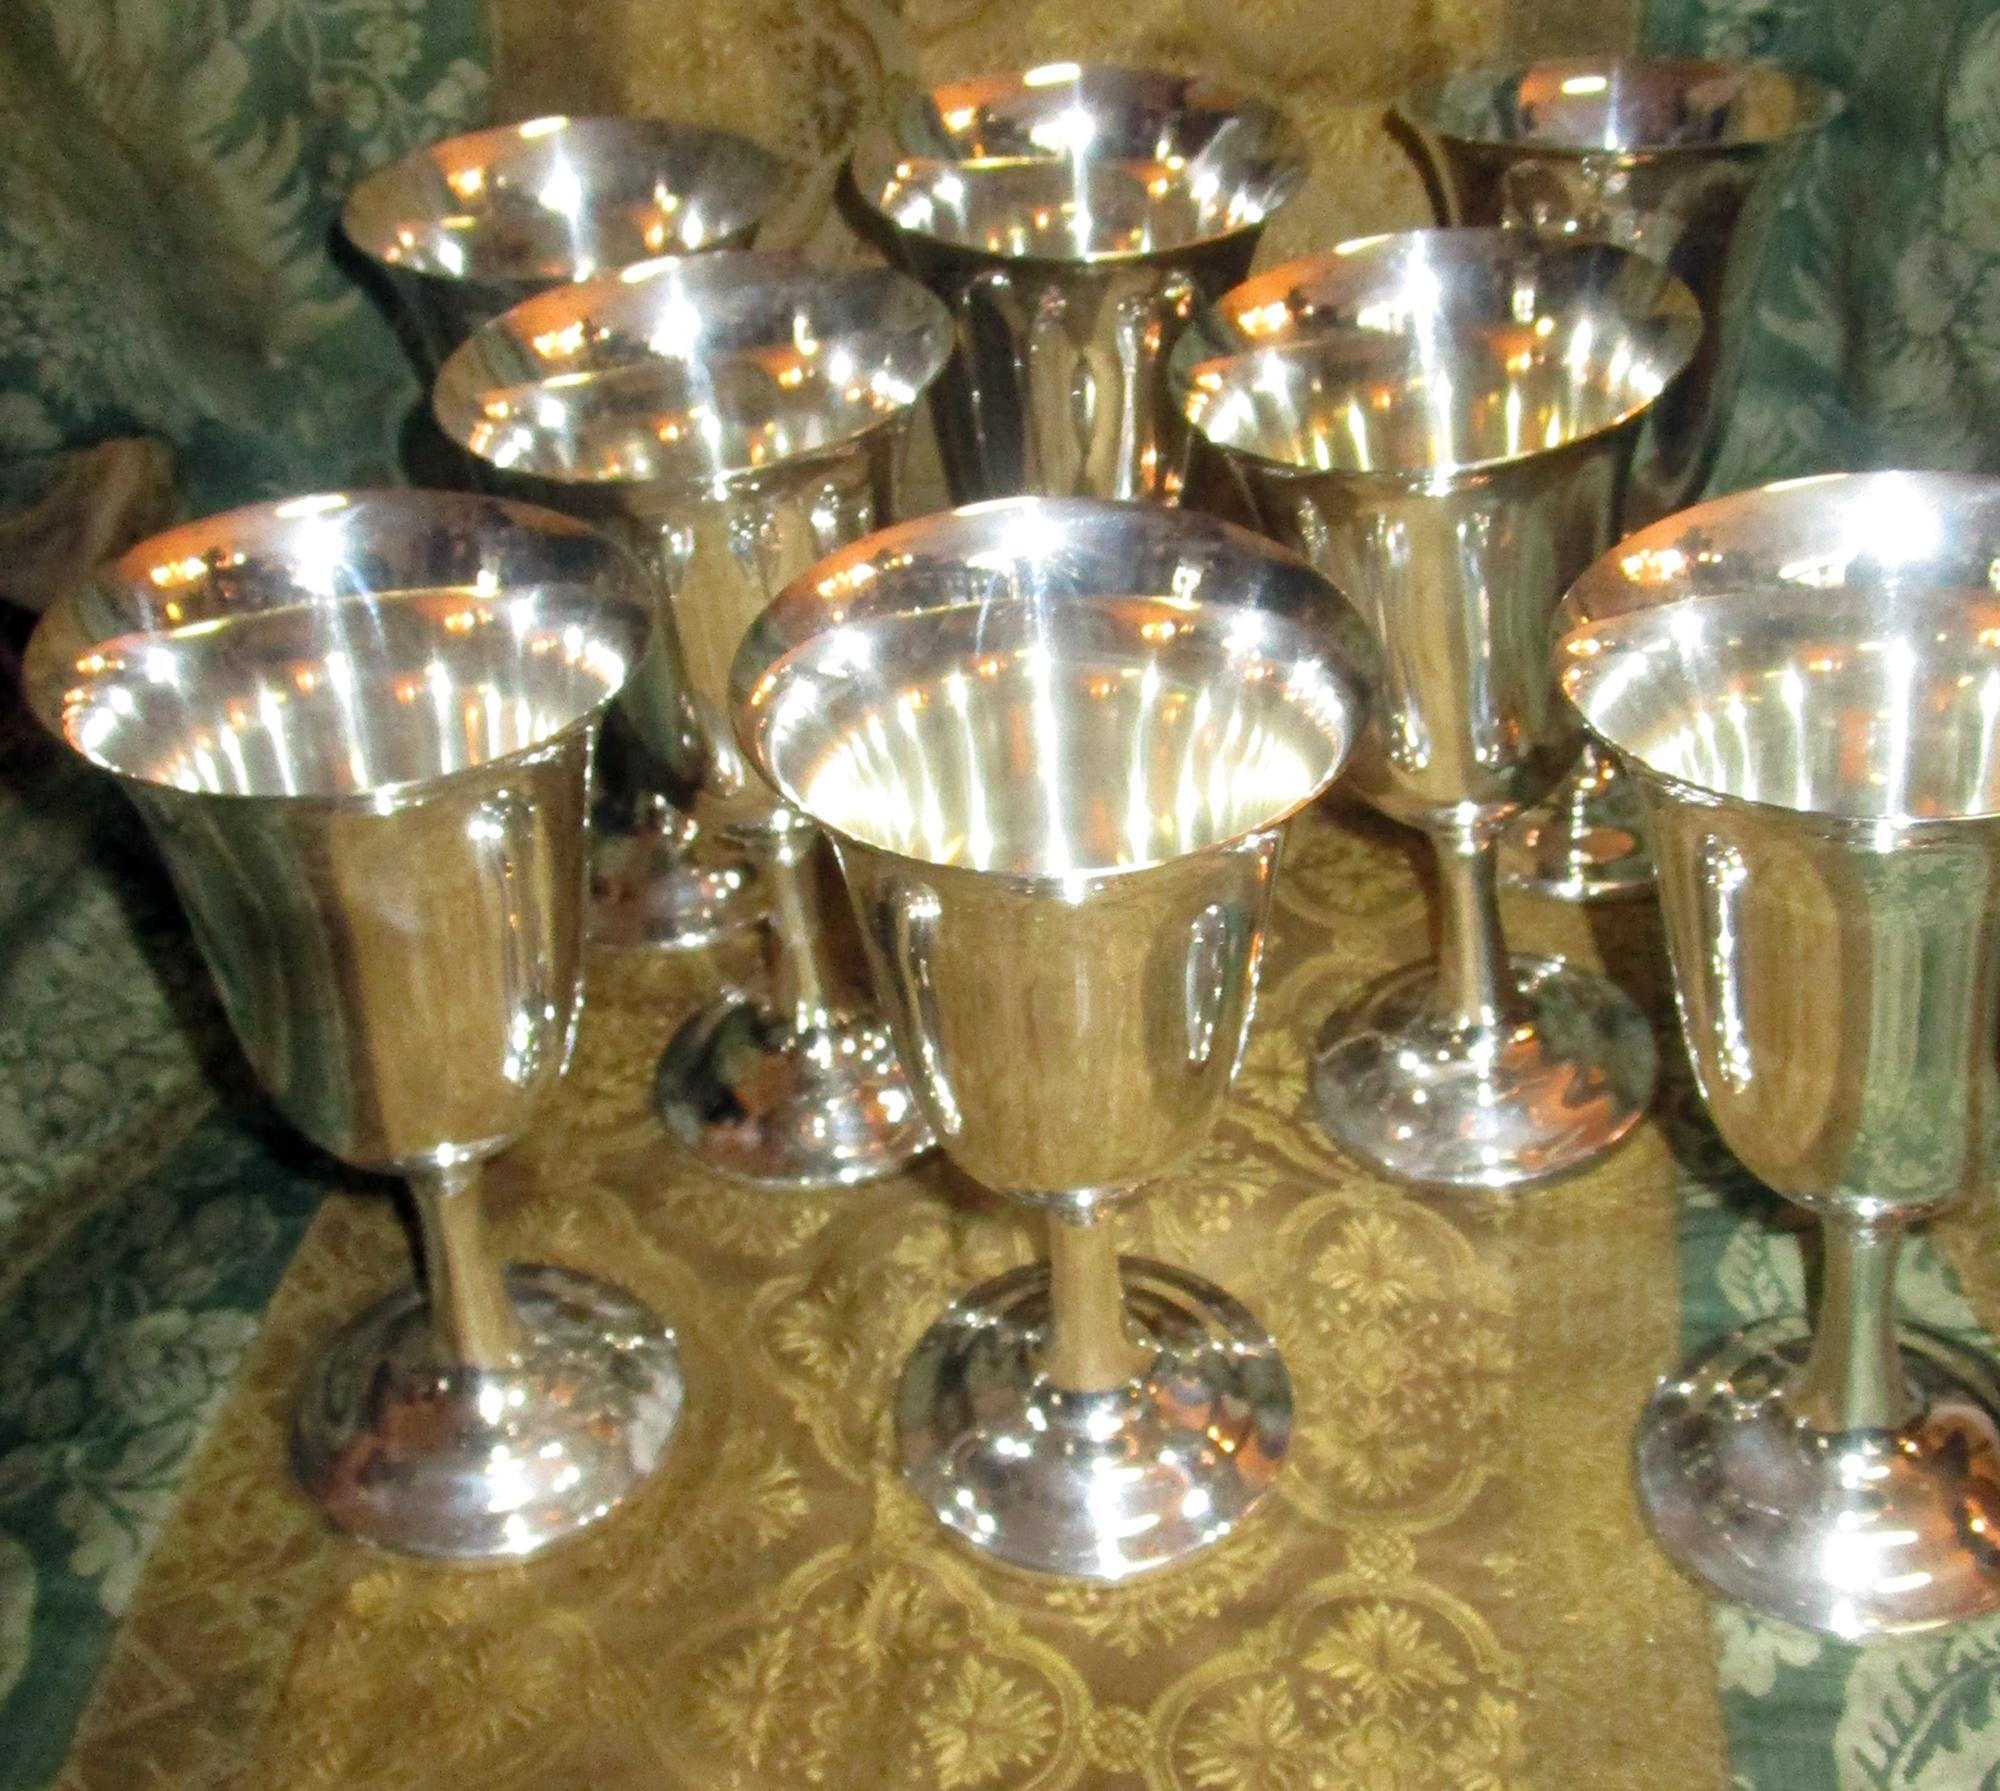 Handsome sterling silver water goblets by Wallace silversmiths, Wallingford, Connecticut. Set of eight pieces featuring classic lines of graceful bell shaped form on an incurved stem and circular foot. Maker's mark of Wallace Silversmiths, number